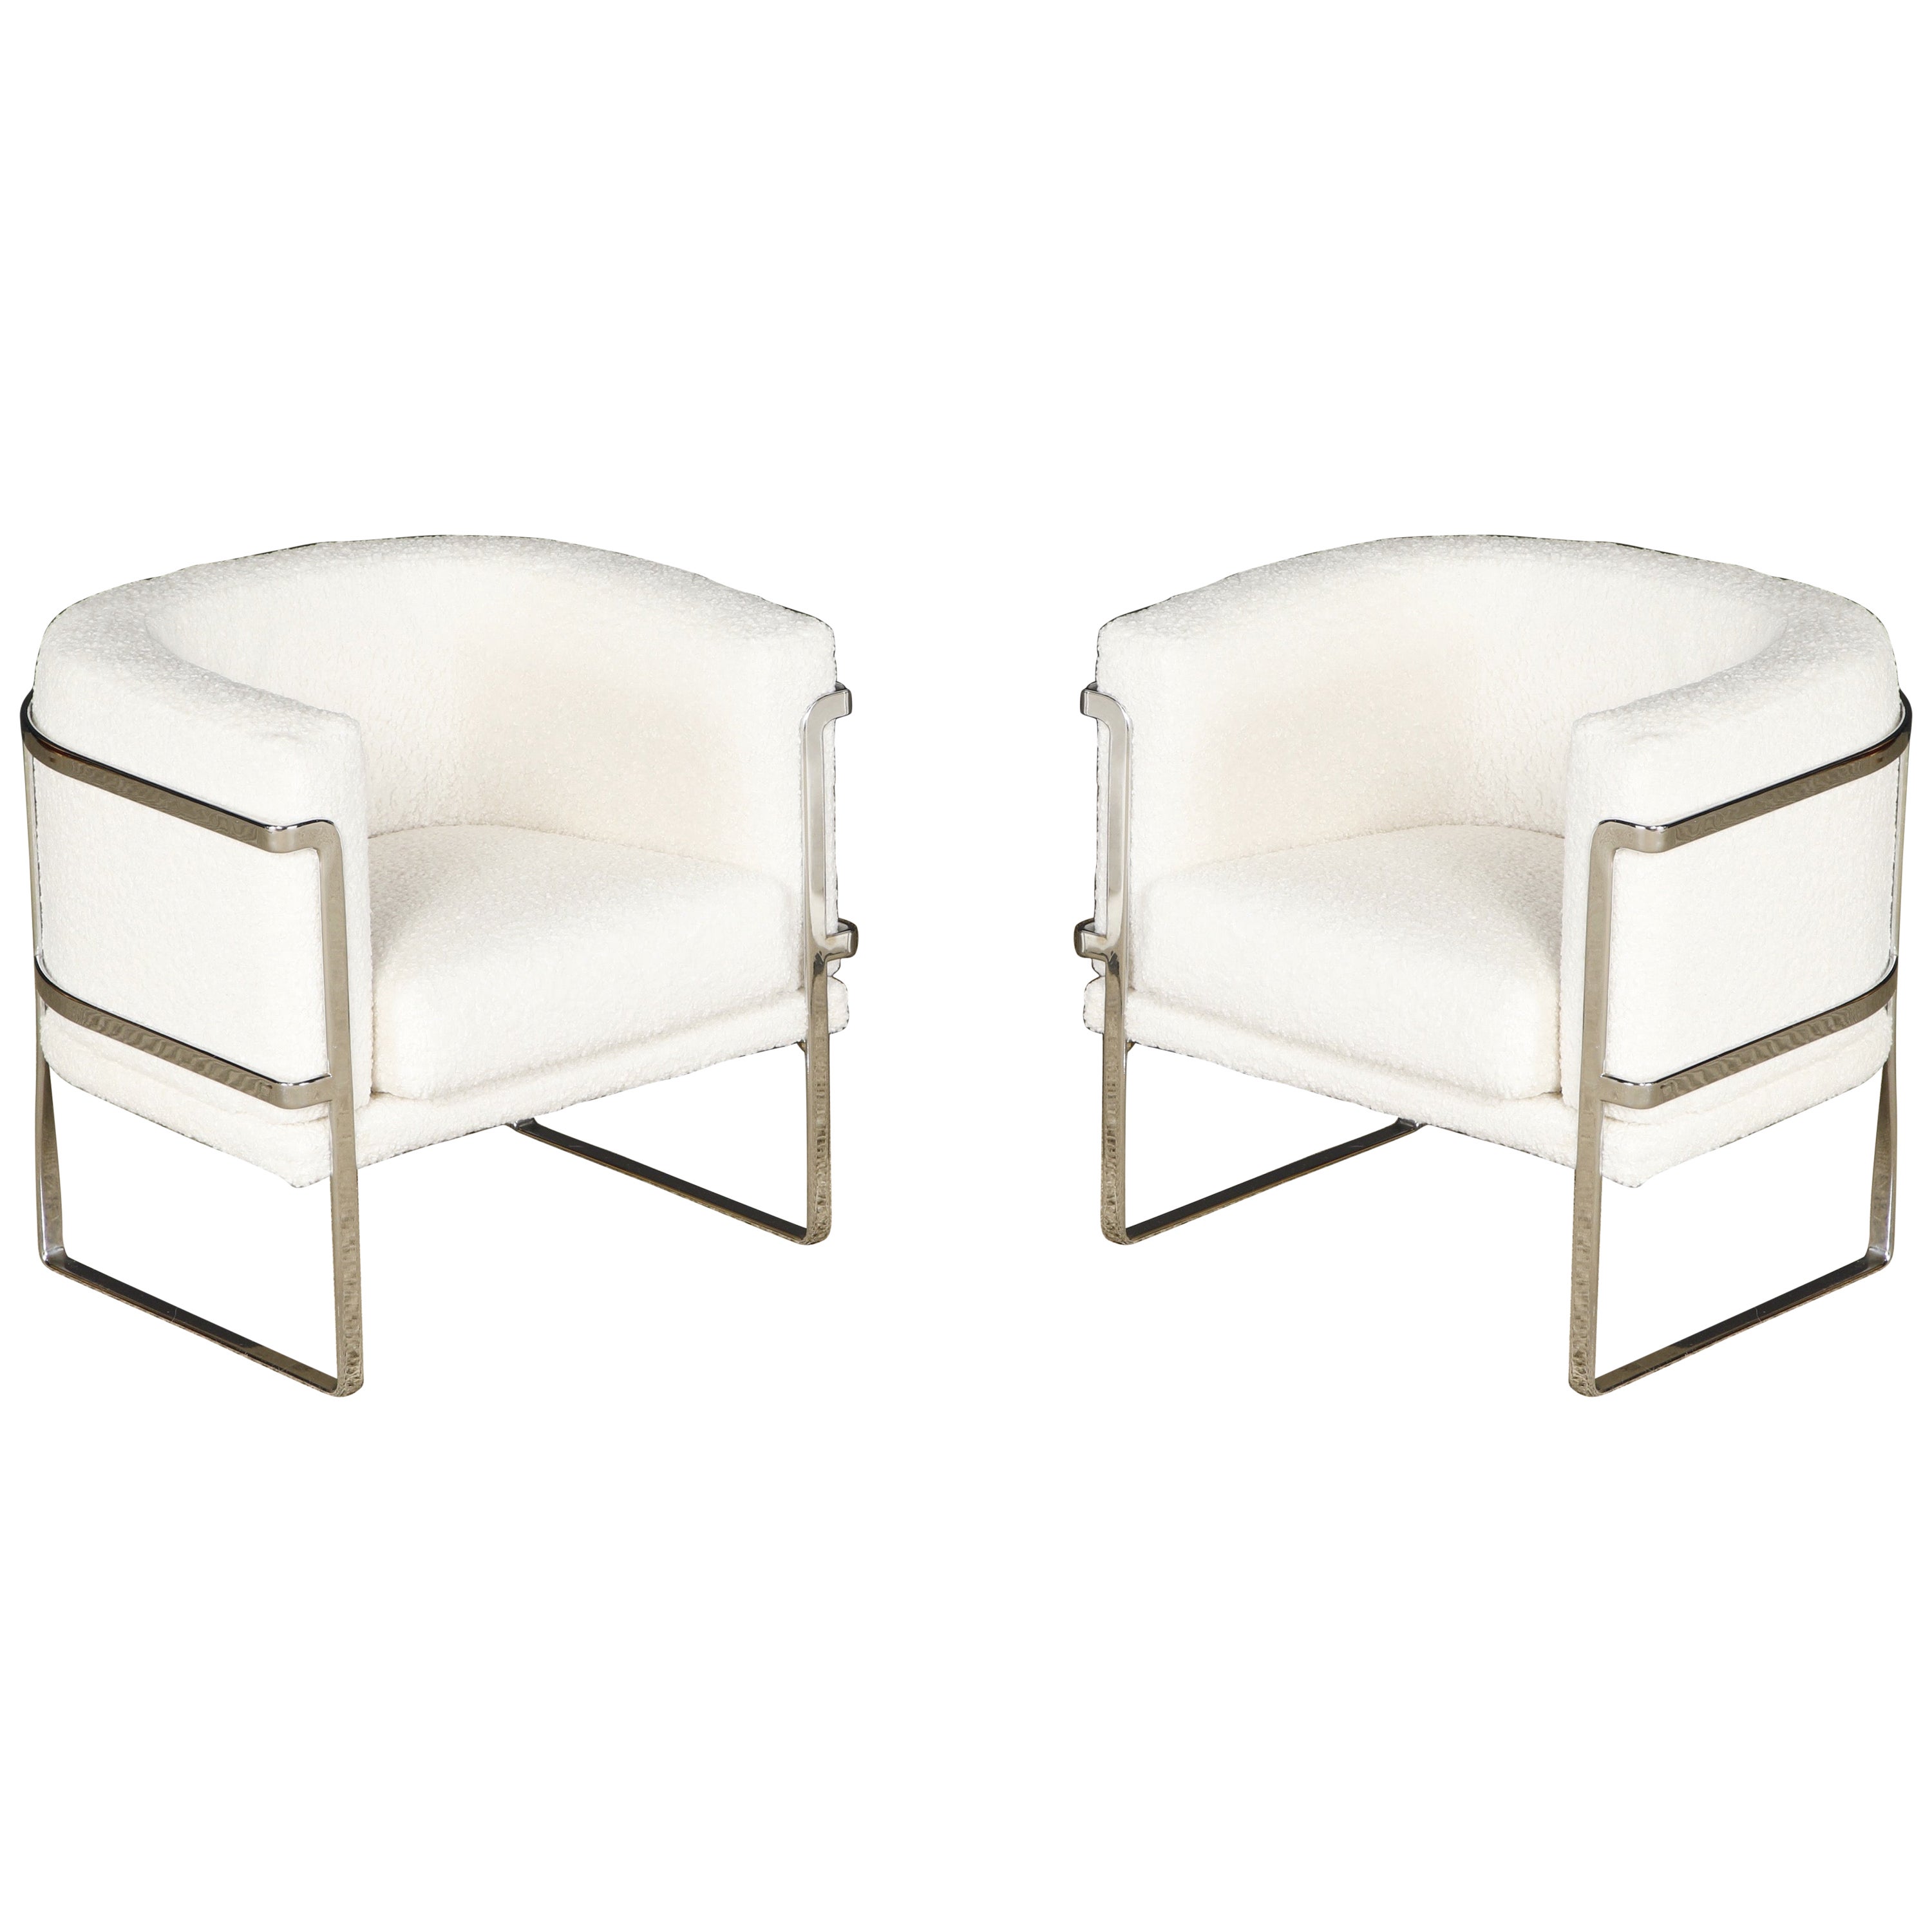 Pair of Club Chairs by Claudio Salocchi for Sormani Italy, c 1970, Signed For Sale